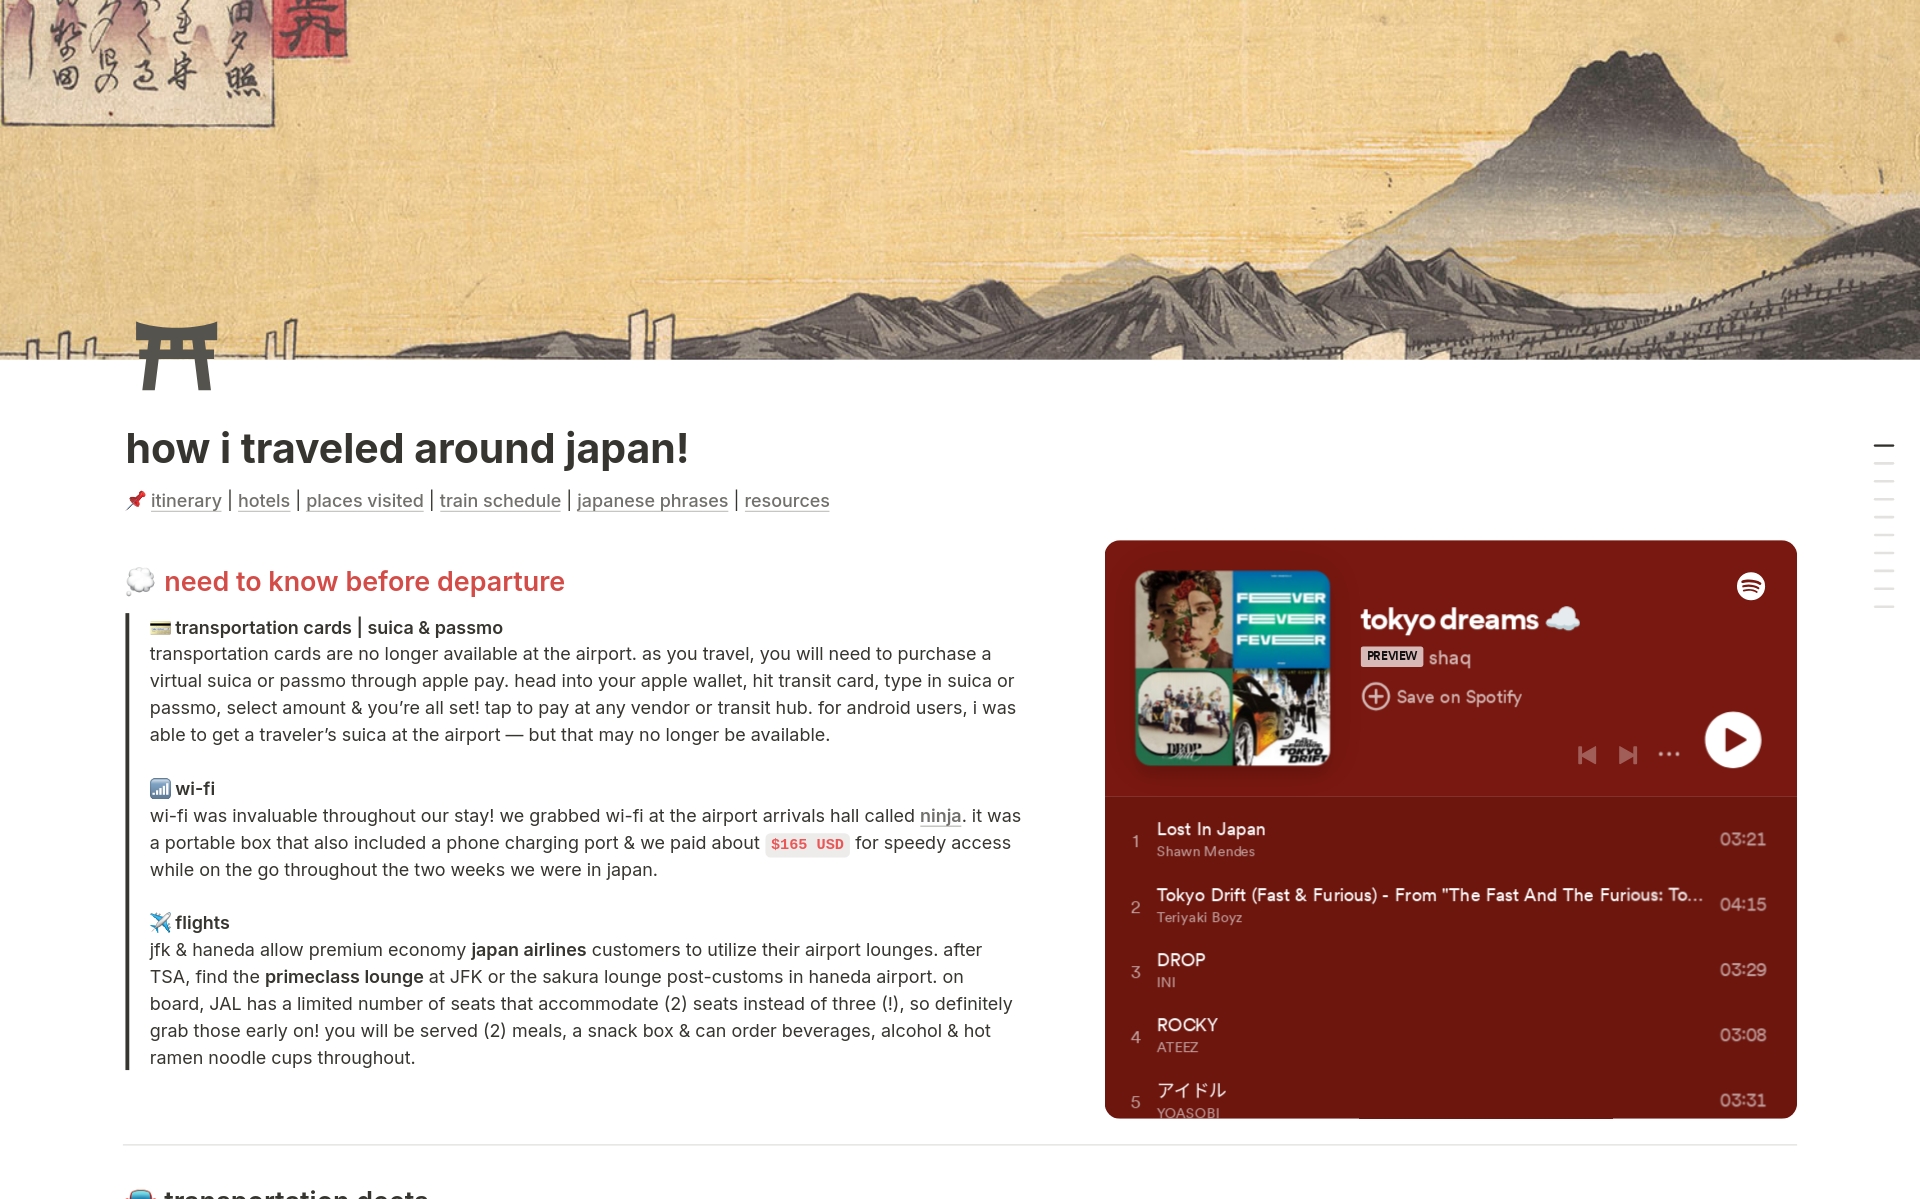 travel guide with route, points of interest, tips, hotel, transportation and more to take you on my first japanese adventure!